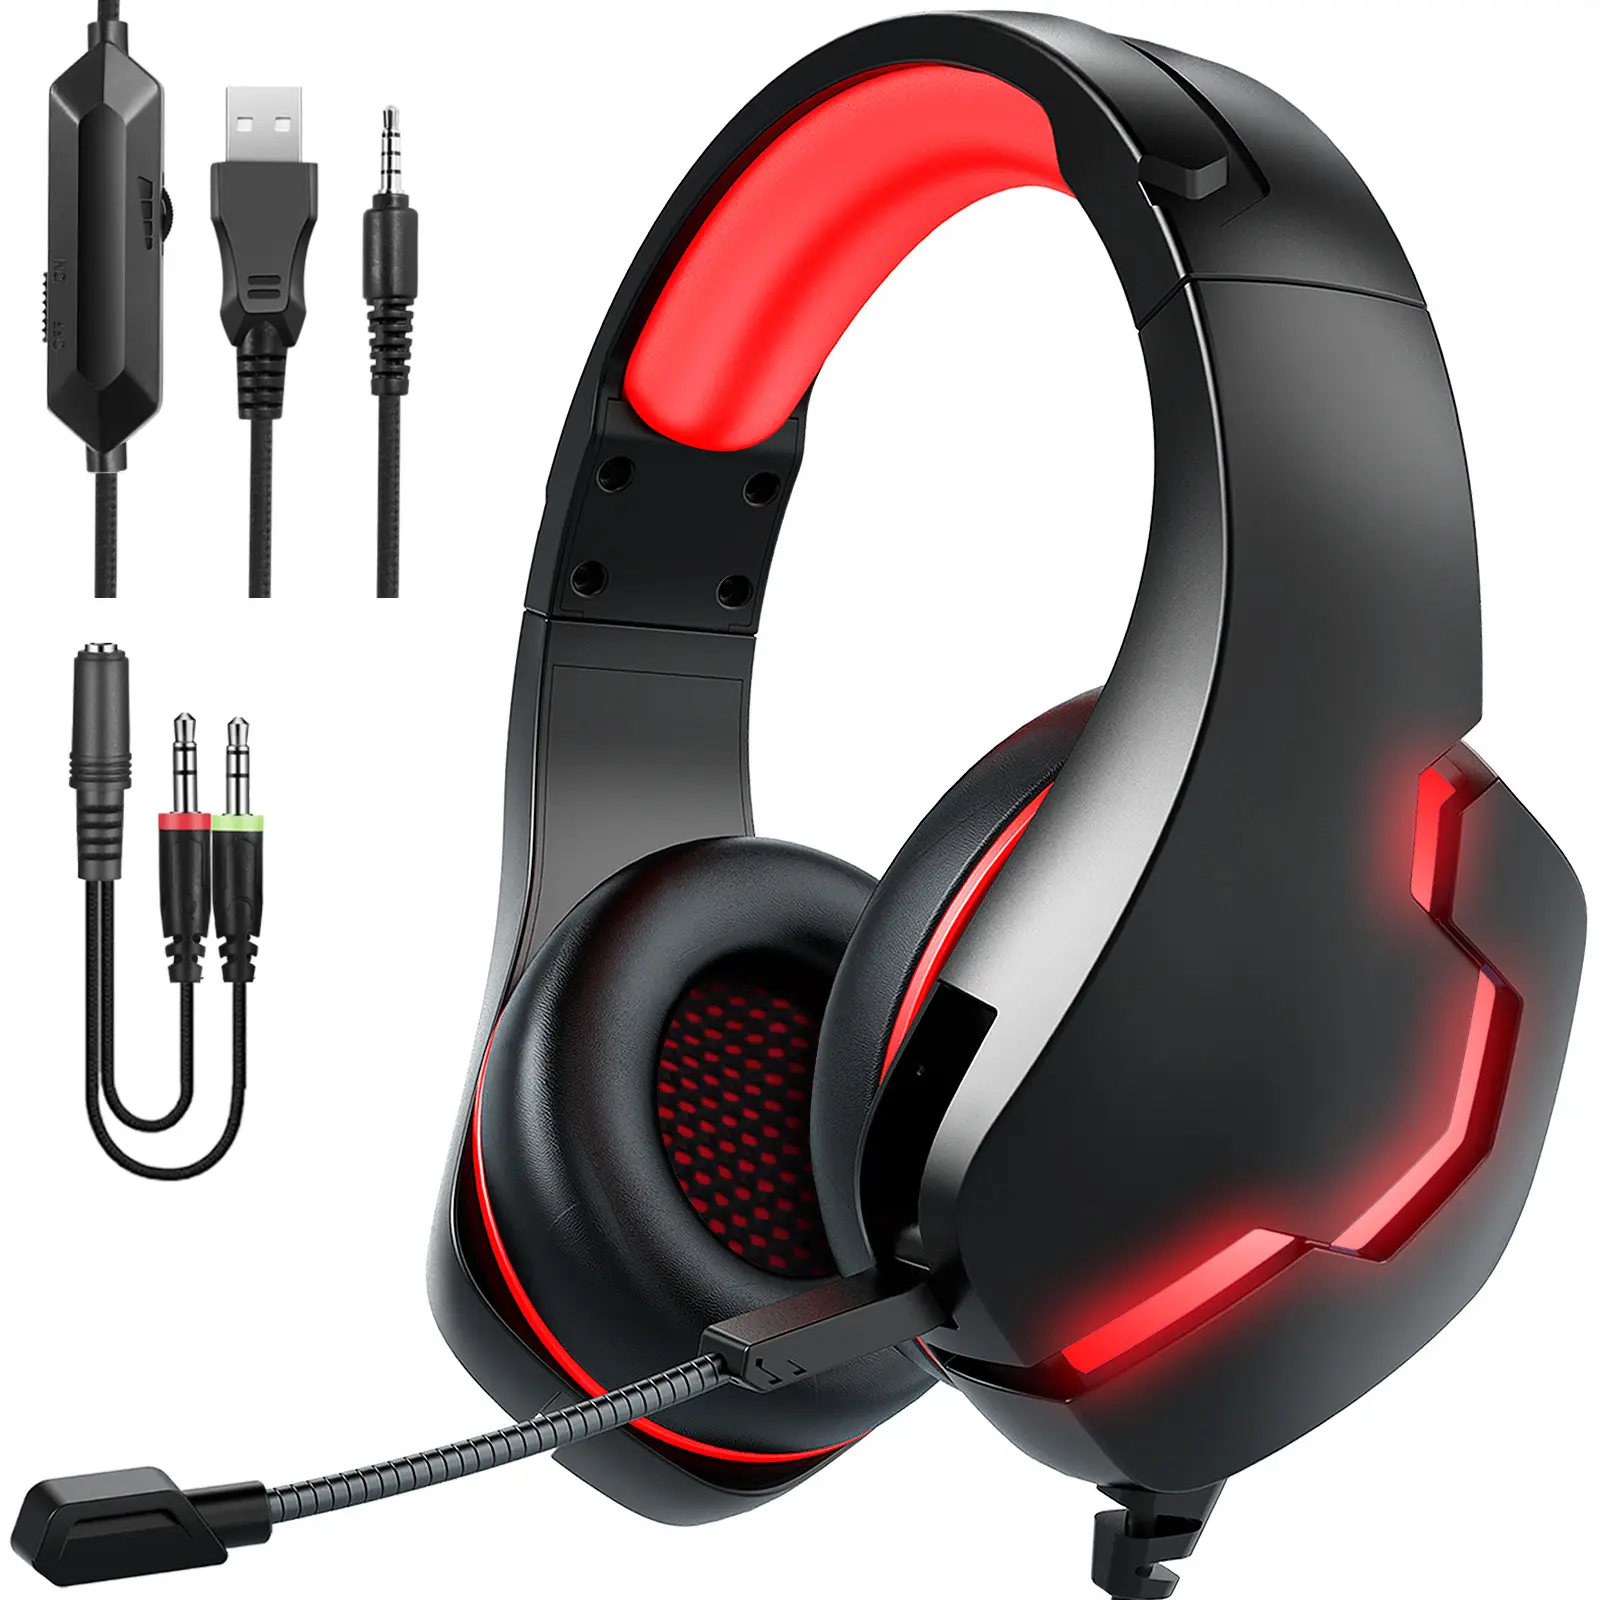 PC PS4 Xbox Headset With HD Microphone RGB Breathing Light 7.1 Stereo Headphone Professional Gaming Headset For E-sports Games